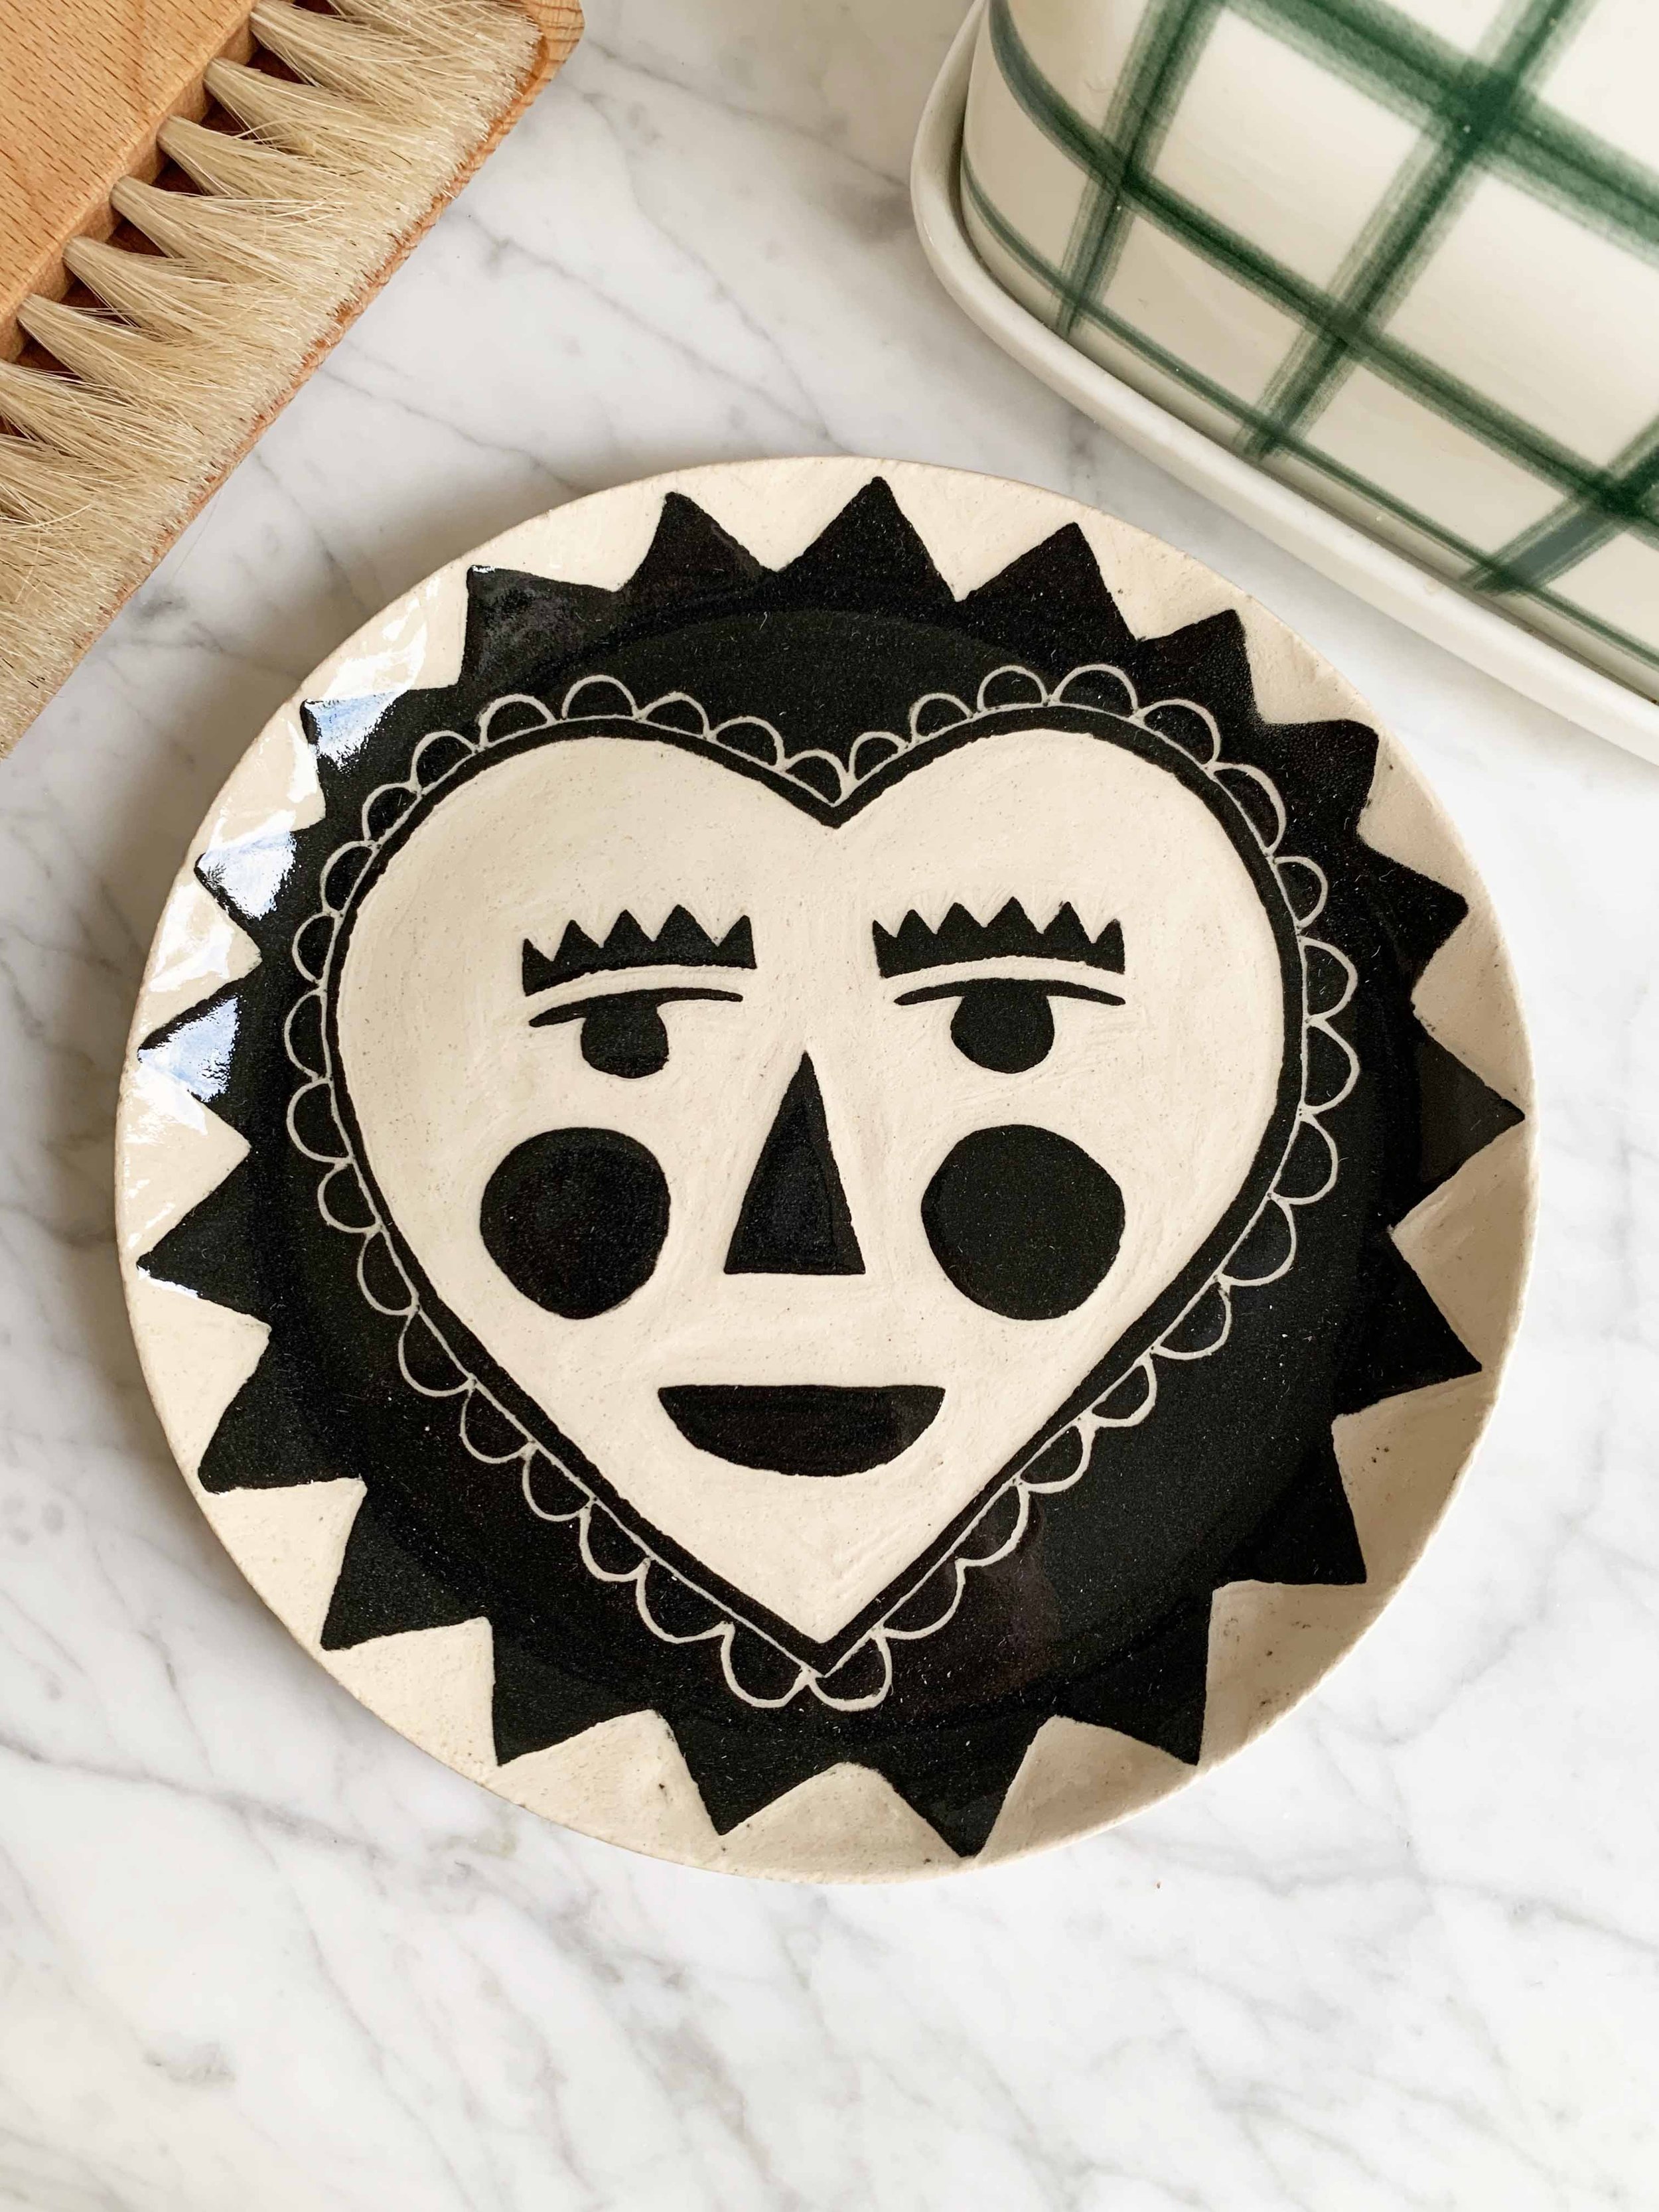 Handmade Sgraffito Ceramic Plates by Kay (available in shop), 2022